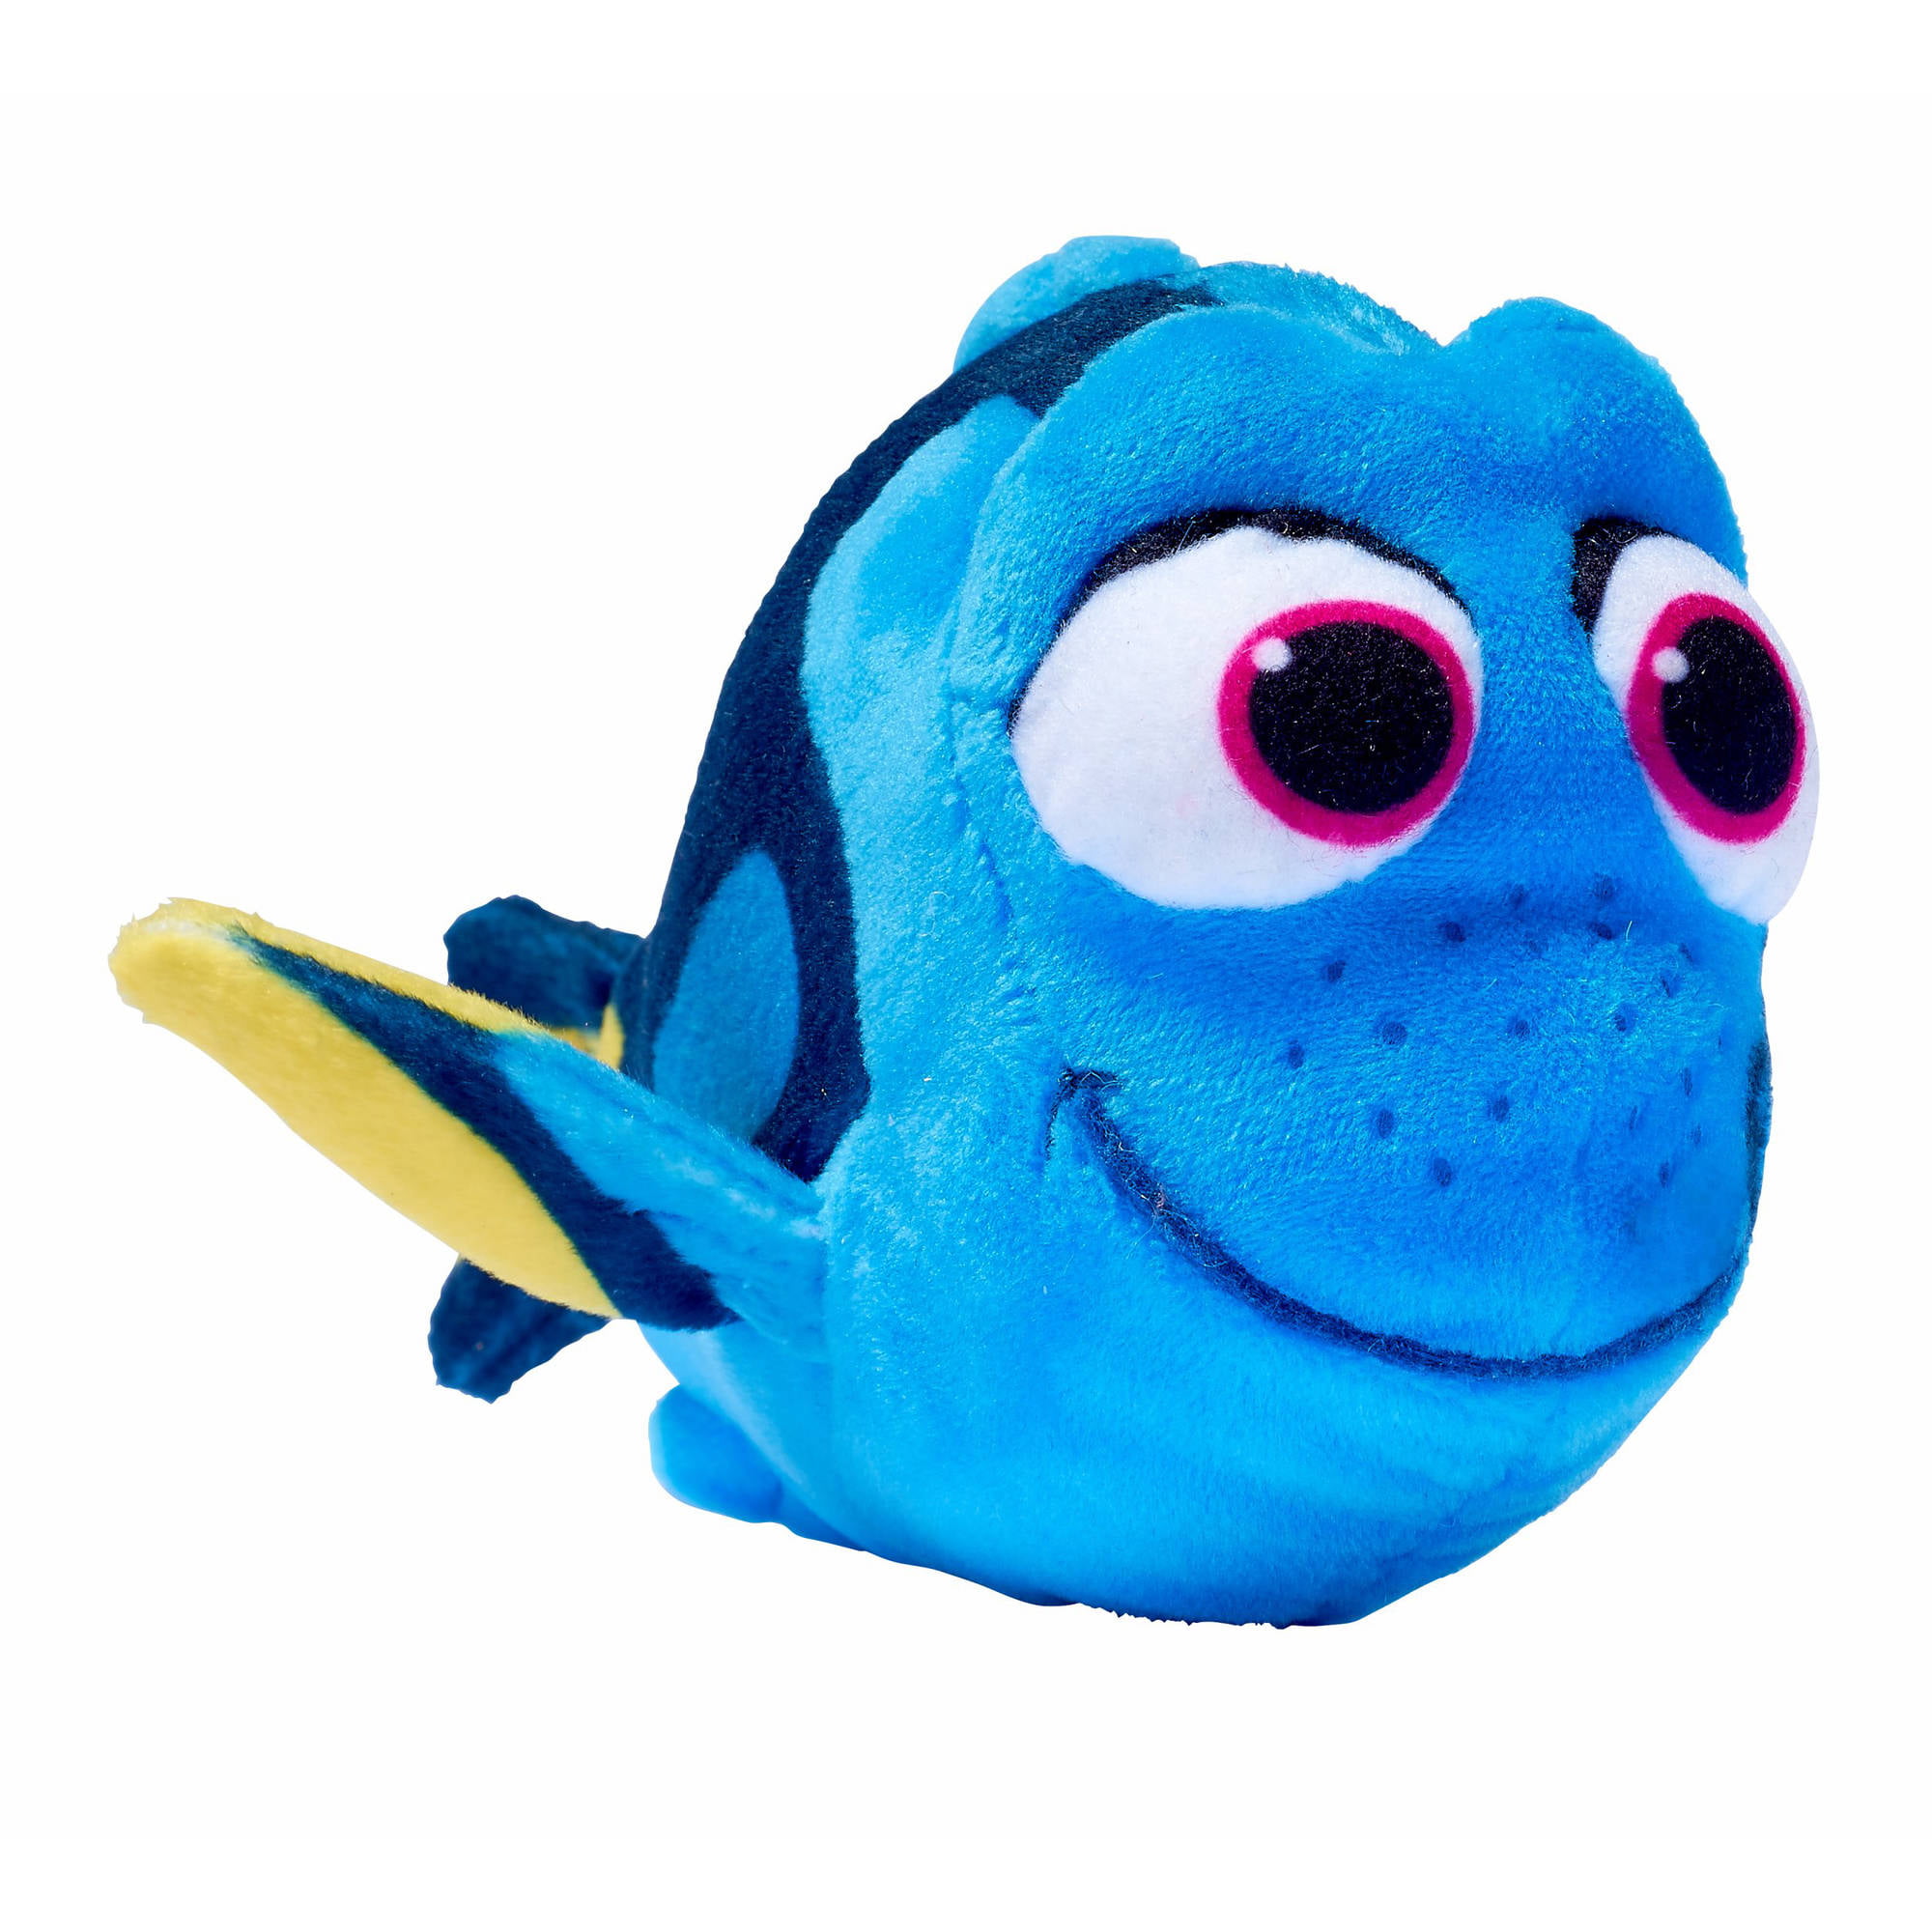 Finding Nemo Dory Fish Soft Toys  Beanies /& Some Talking Disney Movie